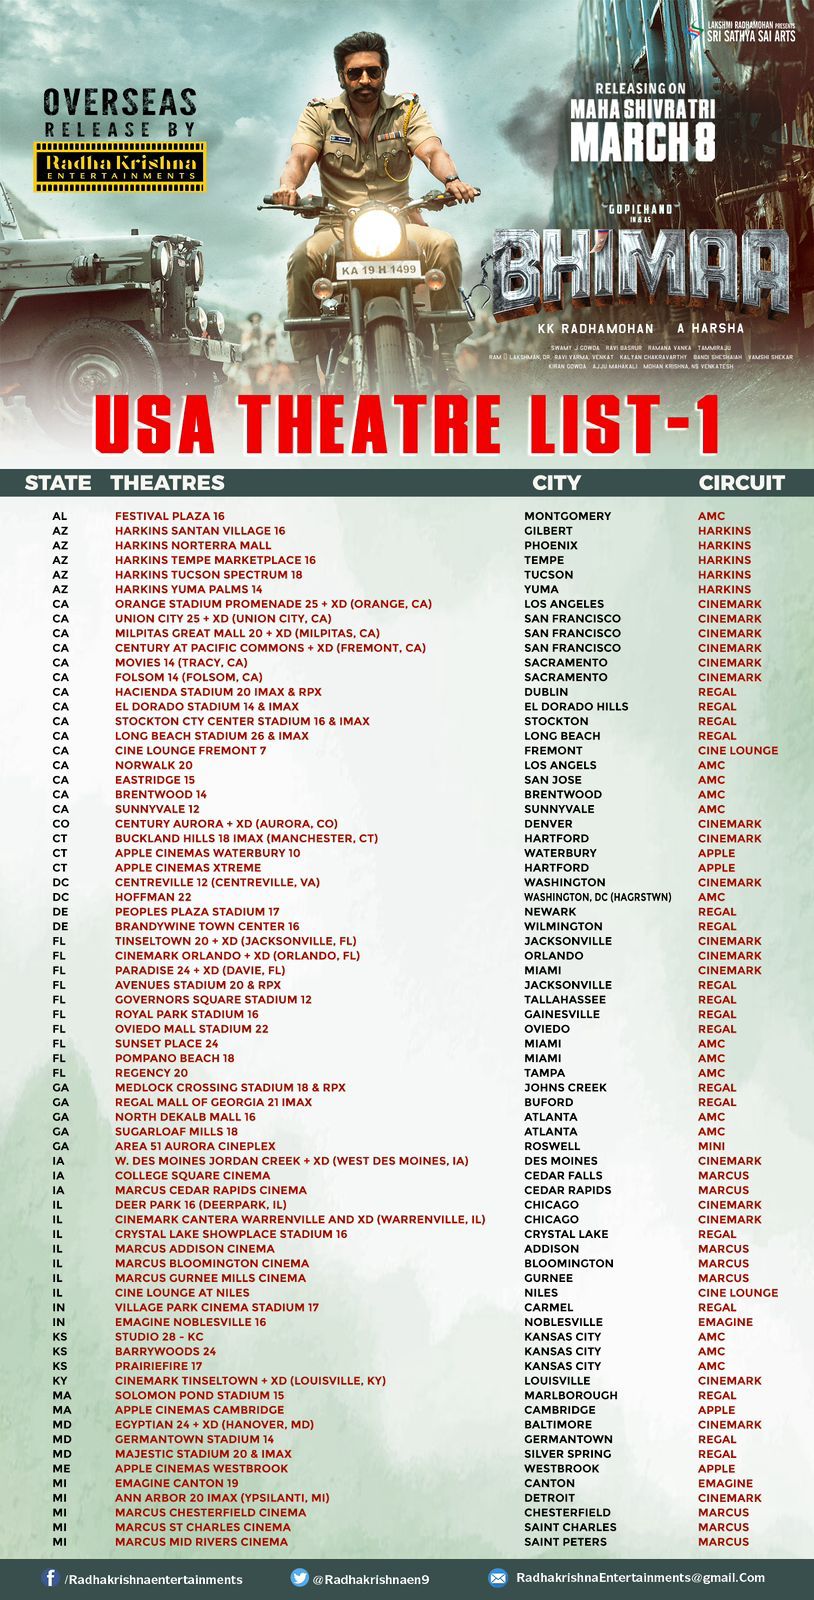 Bhimaa On March 8: Here Is The Final List Of Theatres In Usa!